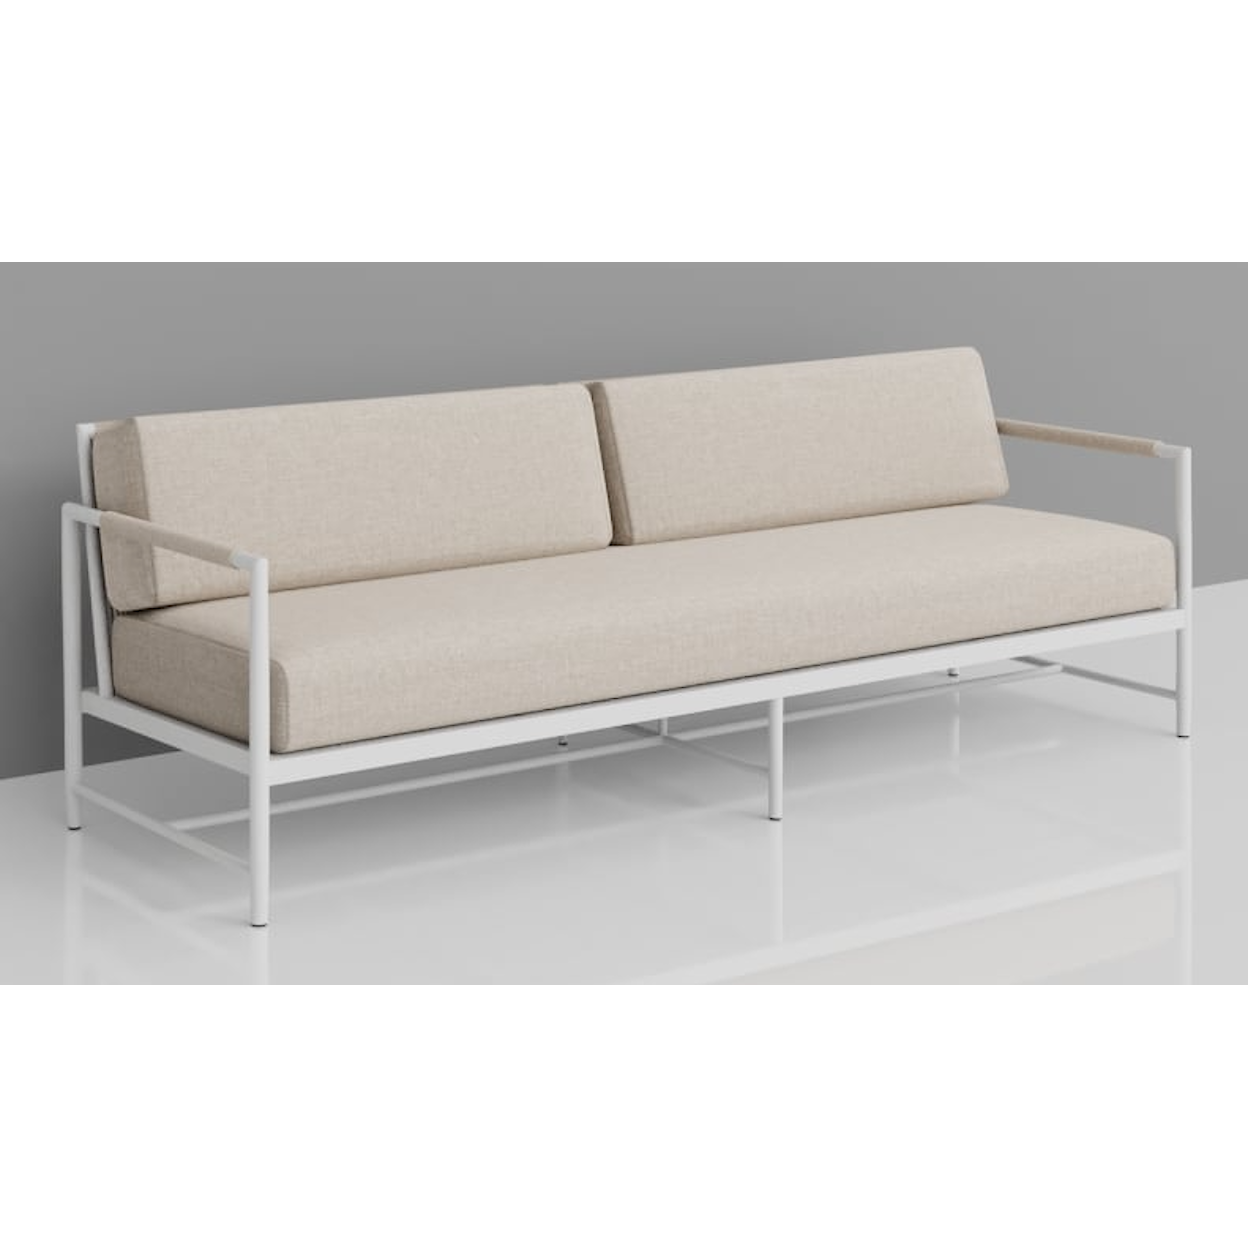 Sunset West Sabbia Outdoor Upholstered Sofa